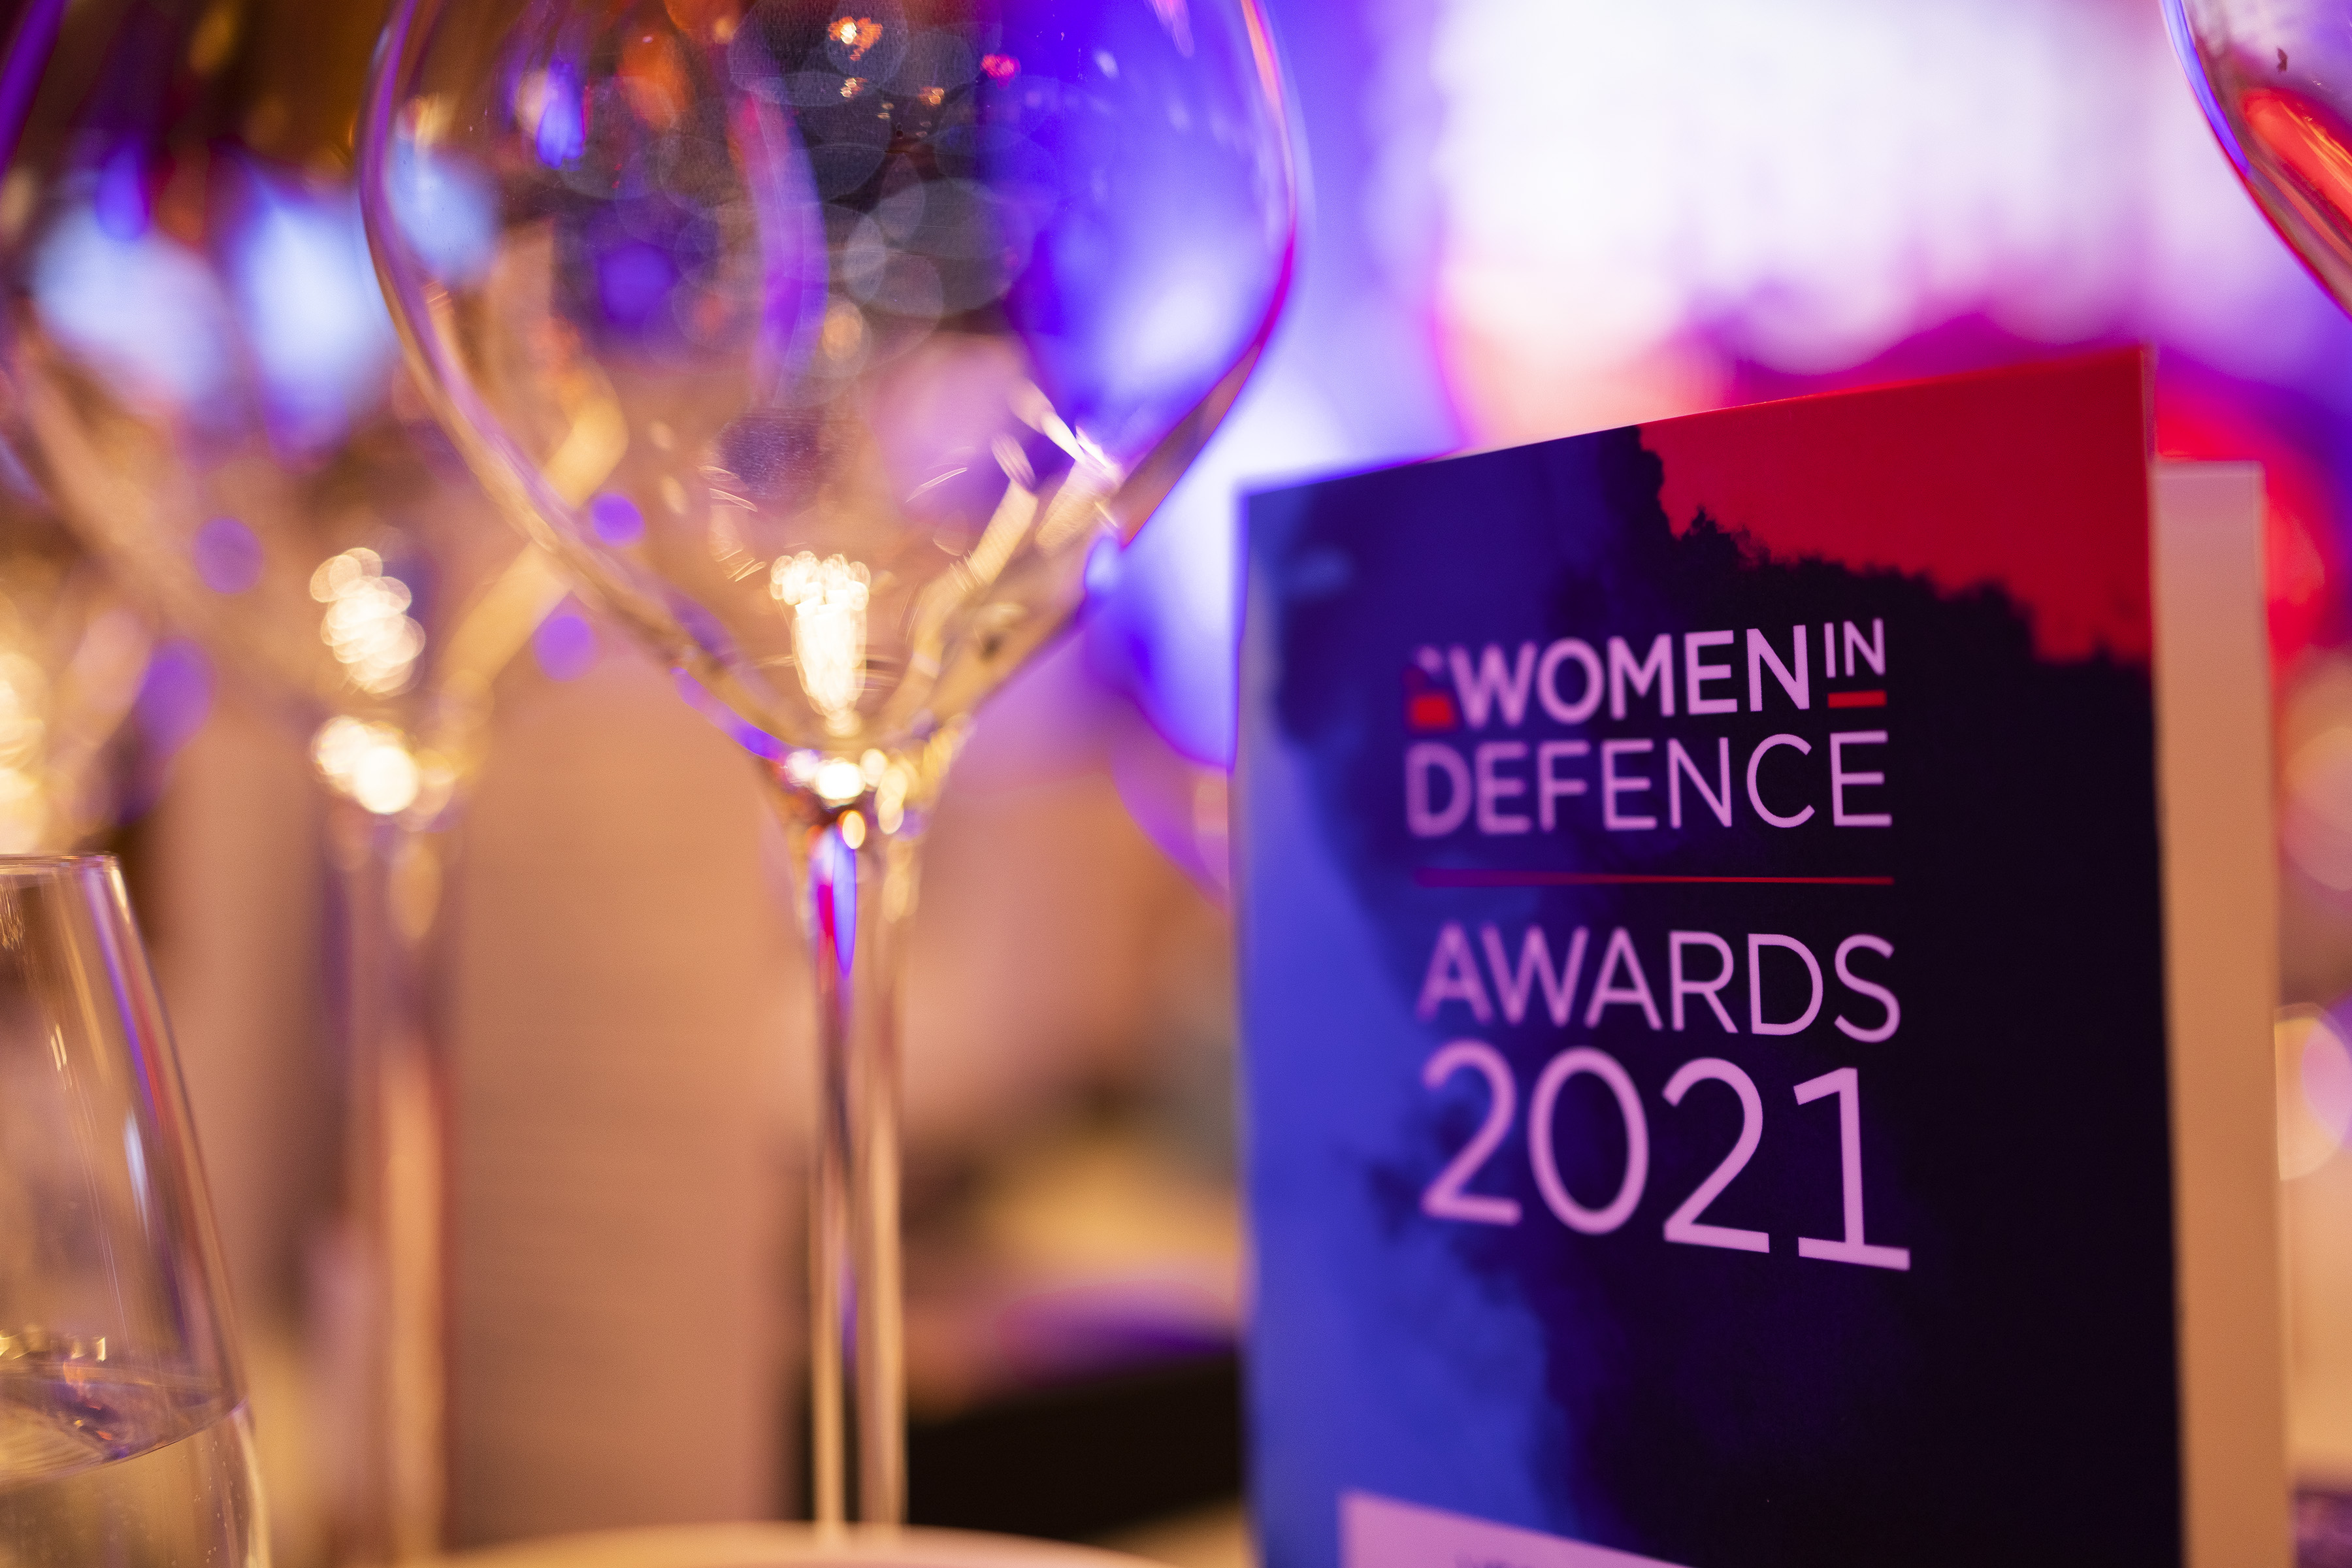 Women in Defence 2021 award next to champagne glasses.